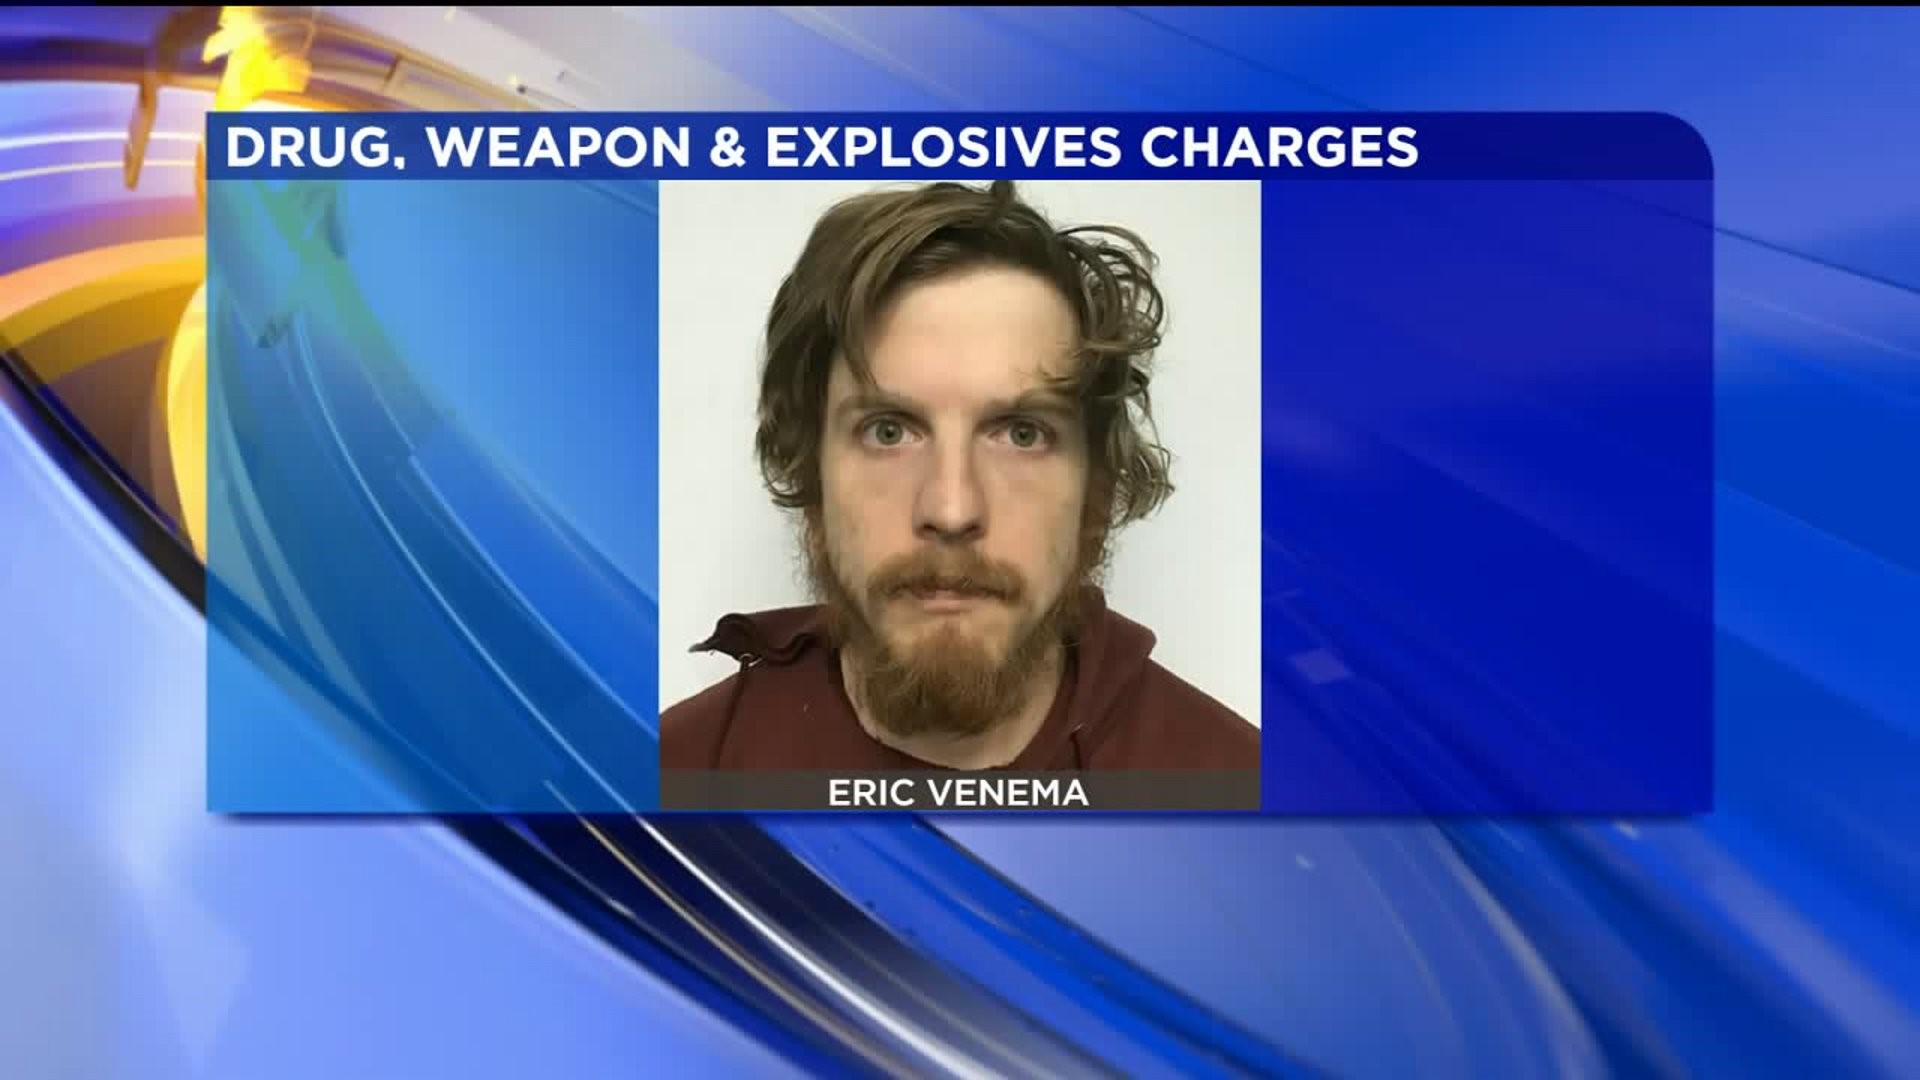 Man Arrested on Drug, Weapons, and Explosives Charges